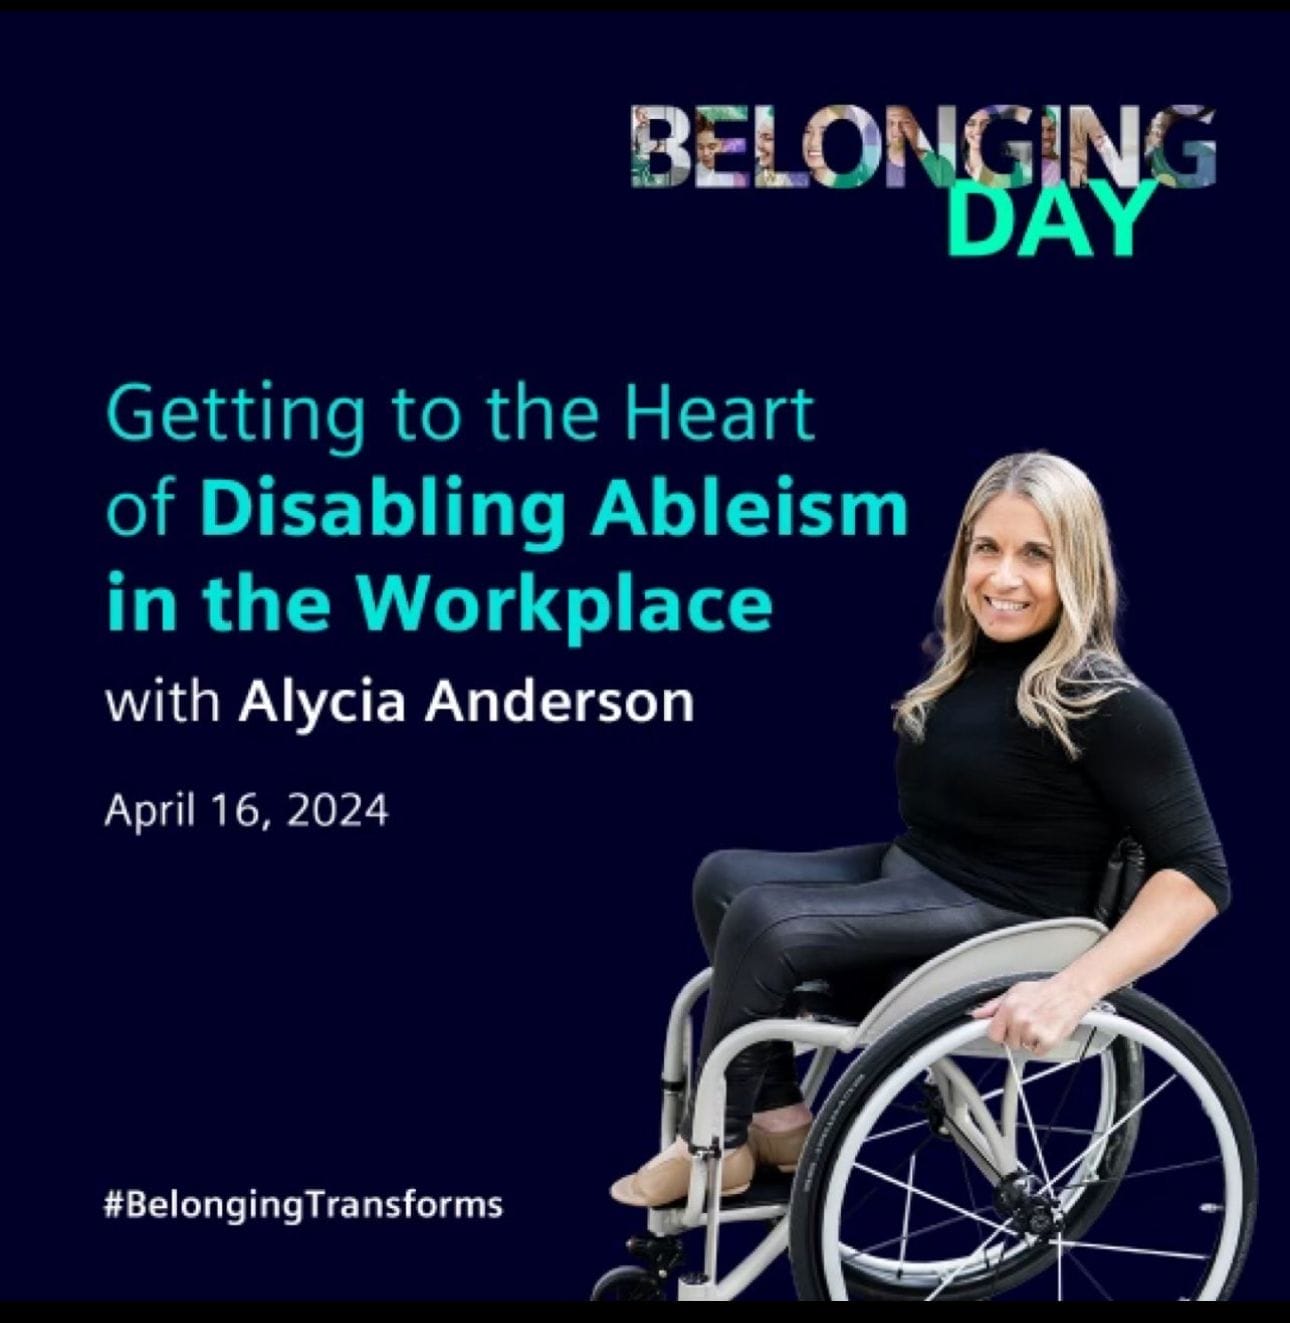 belonging day april sixteenth alycia anderson spoke for siemens delivering her getting to the heart of disabling ableism in the workplace keynote